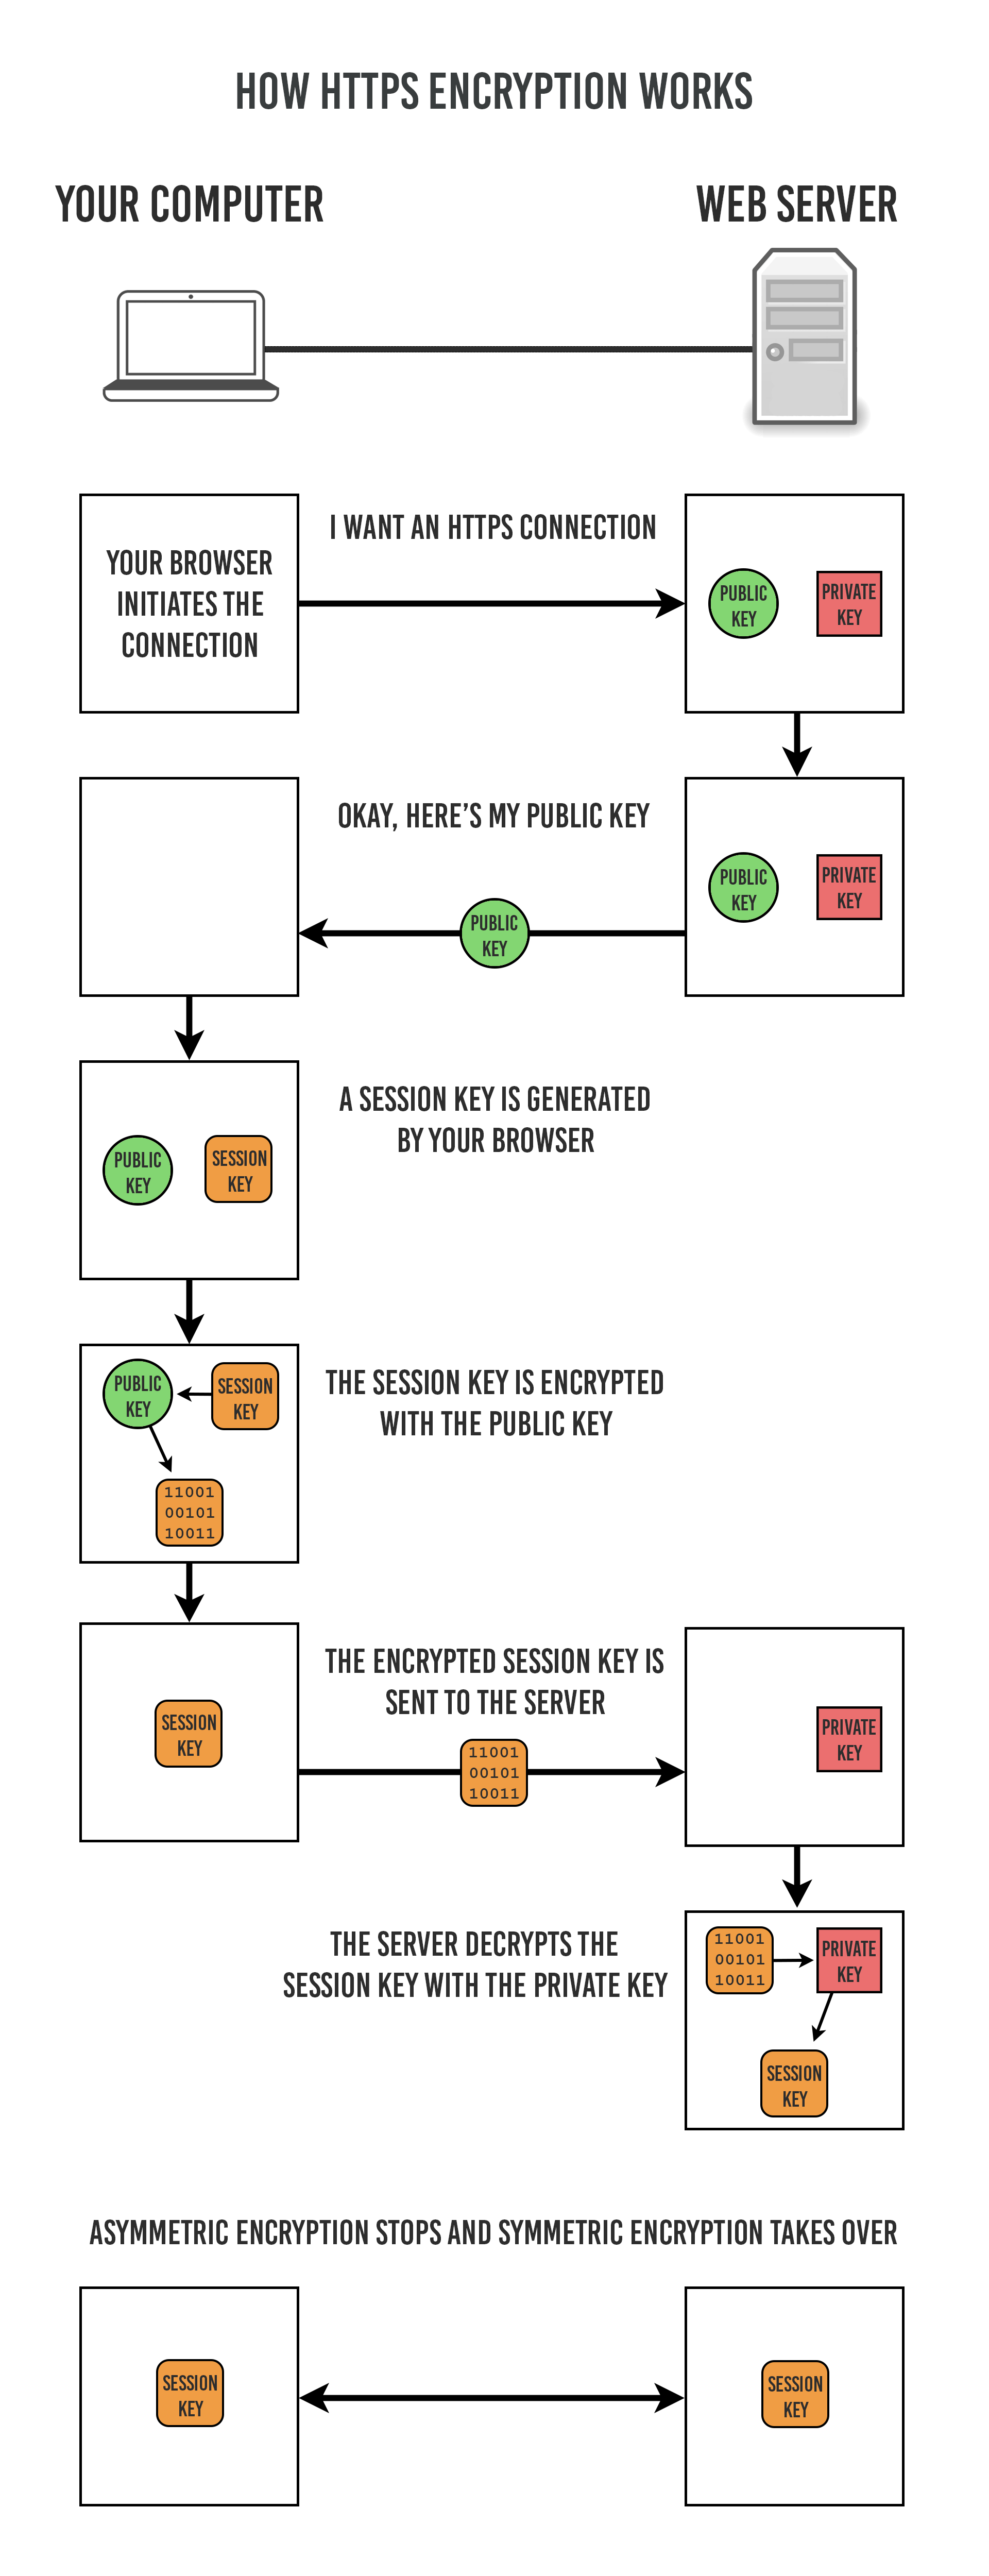 How HTTPs works